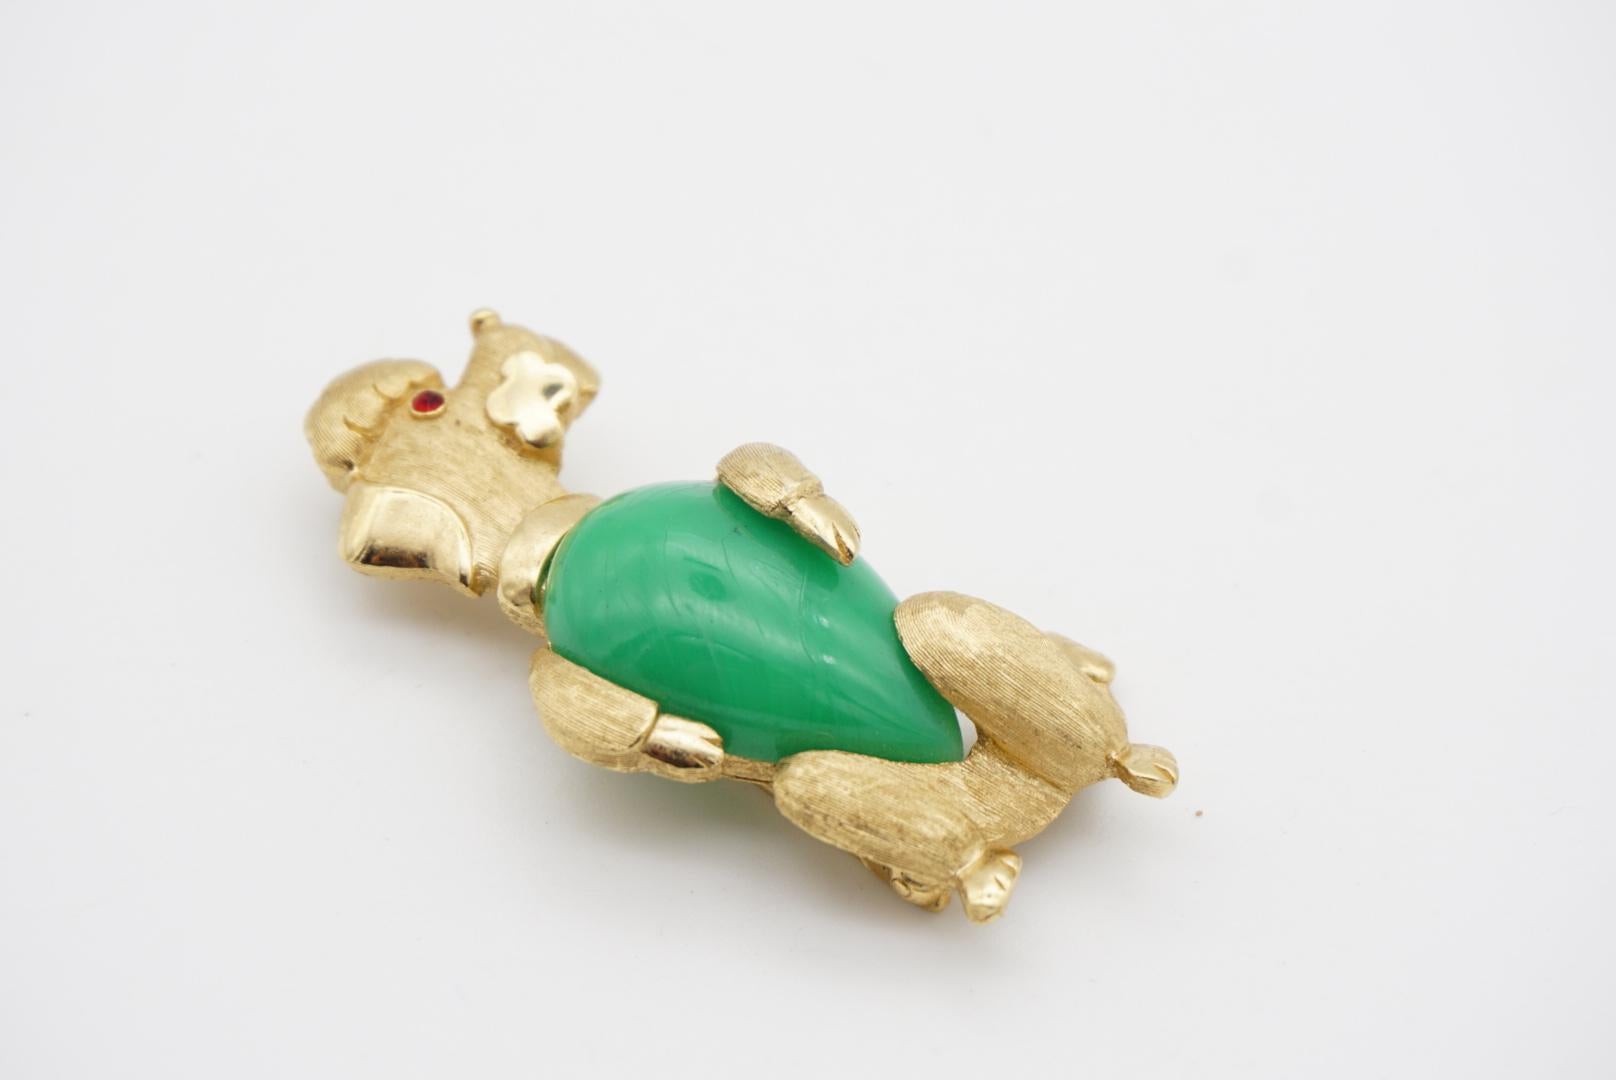 Crown Trifari Vintage 1950s Poodle Dog Jelly Belly Green Jade Cabochon Brooch In Excellent Condition For Sale In Wokingham, England